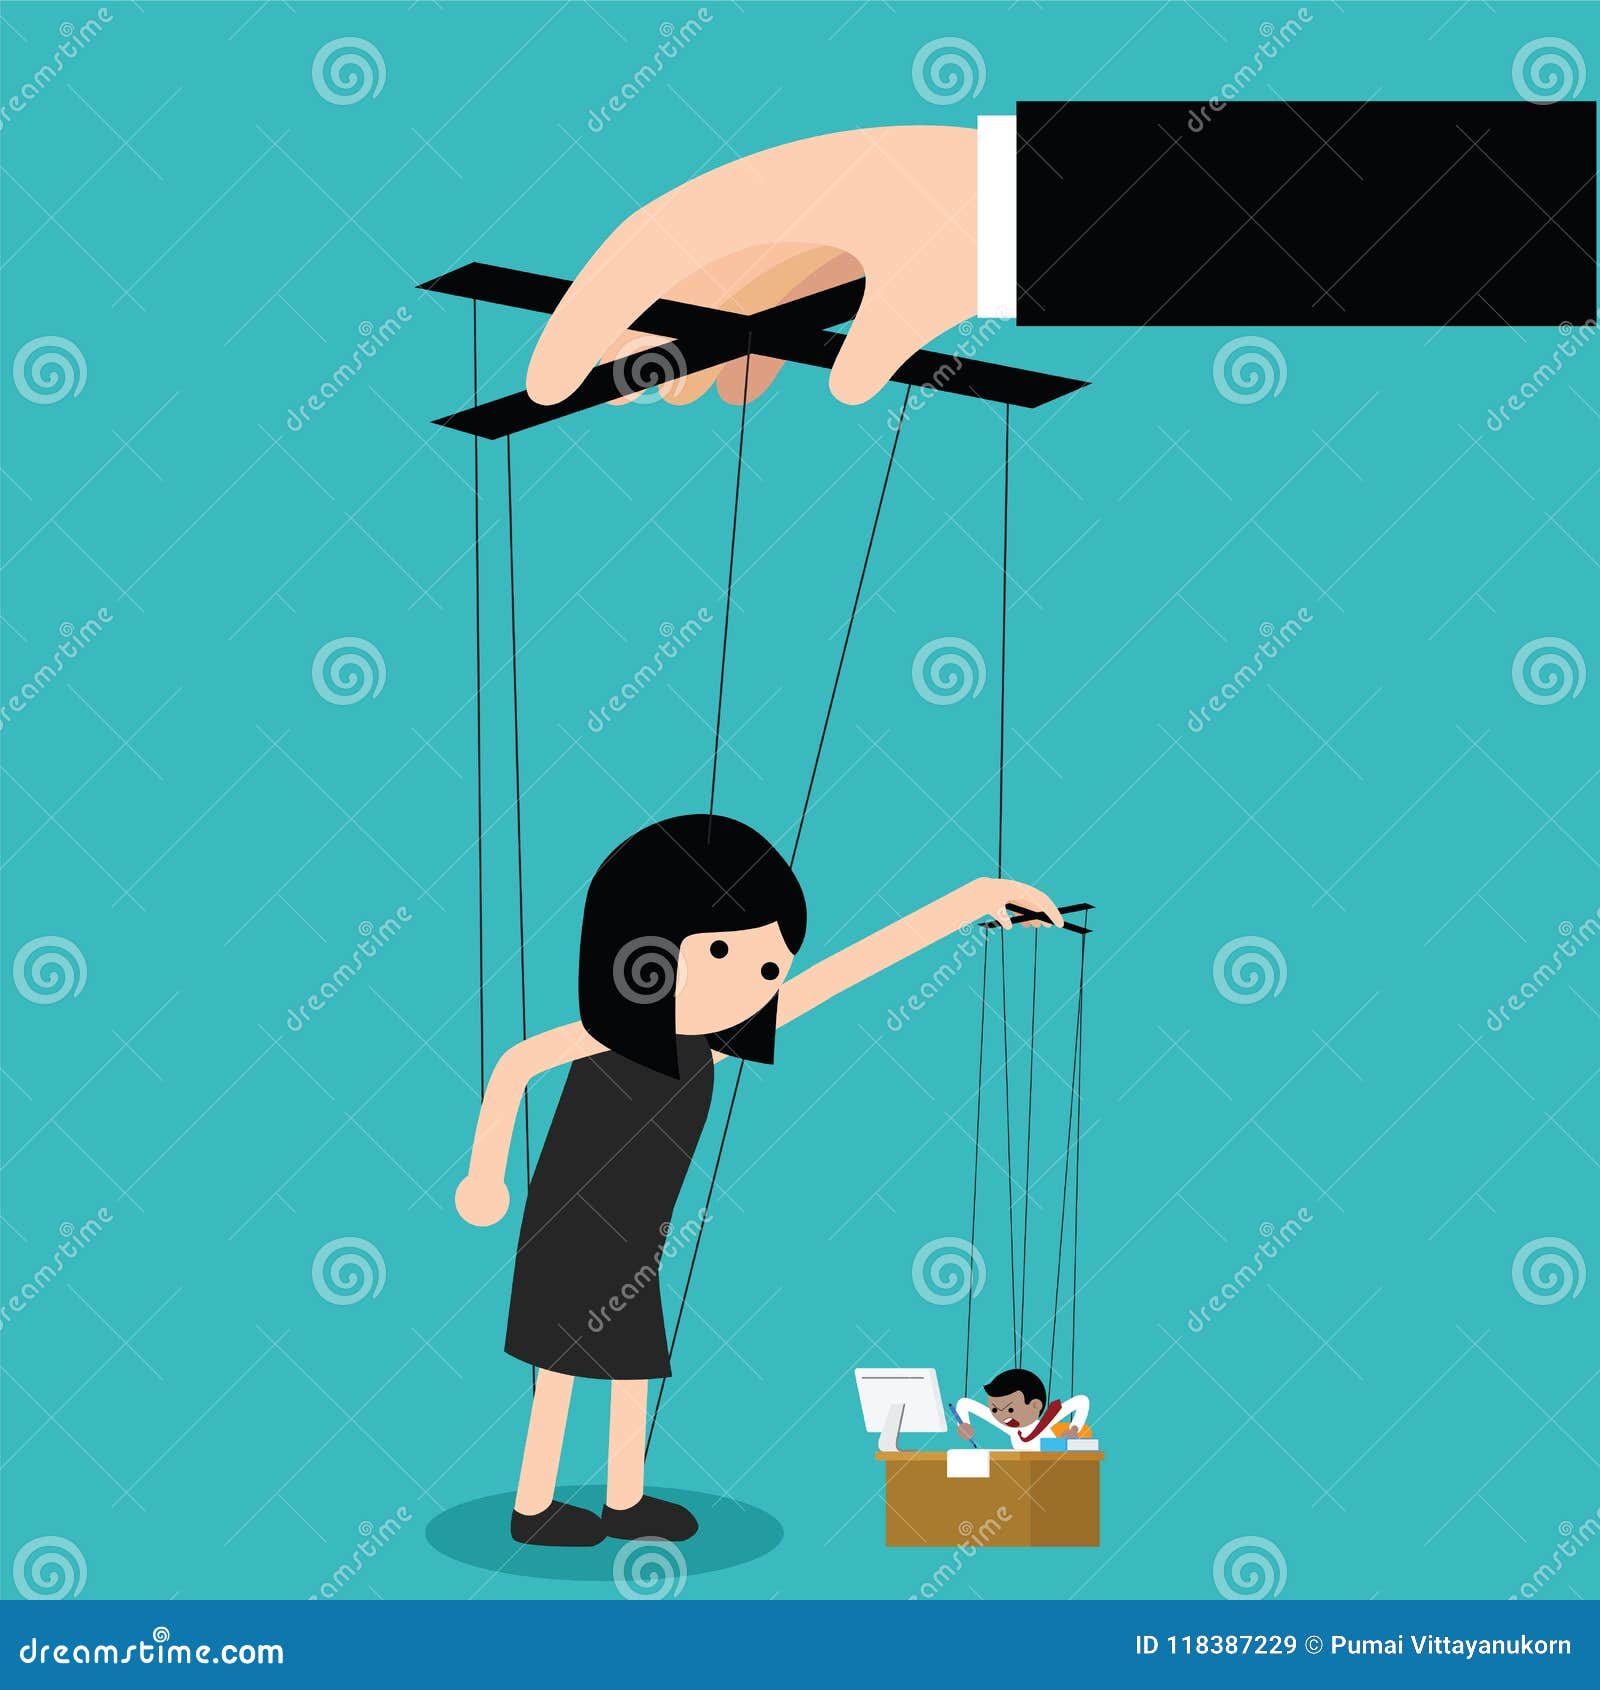 Business Woman Controlling Business Puppet Stock Vector - Illustration ...